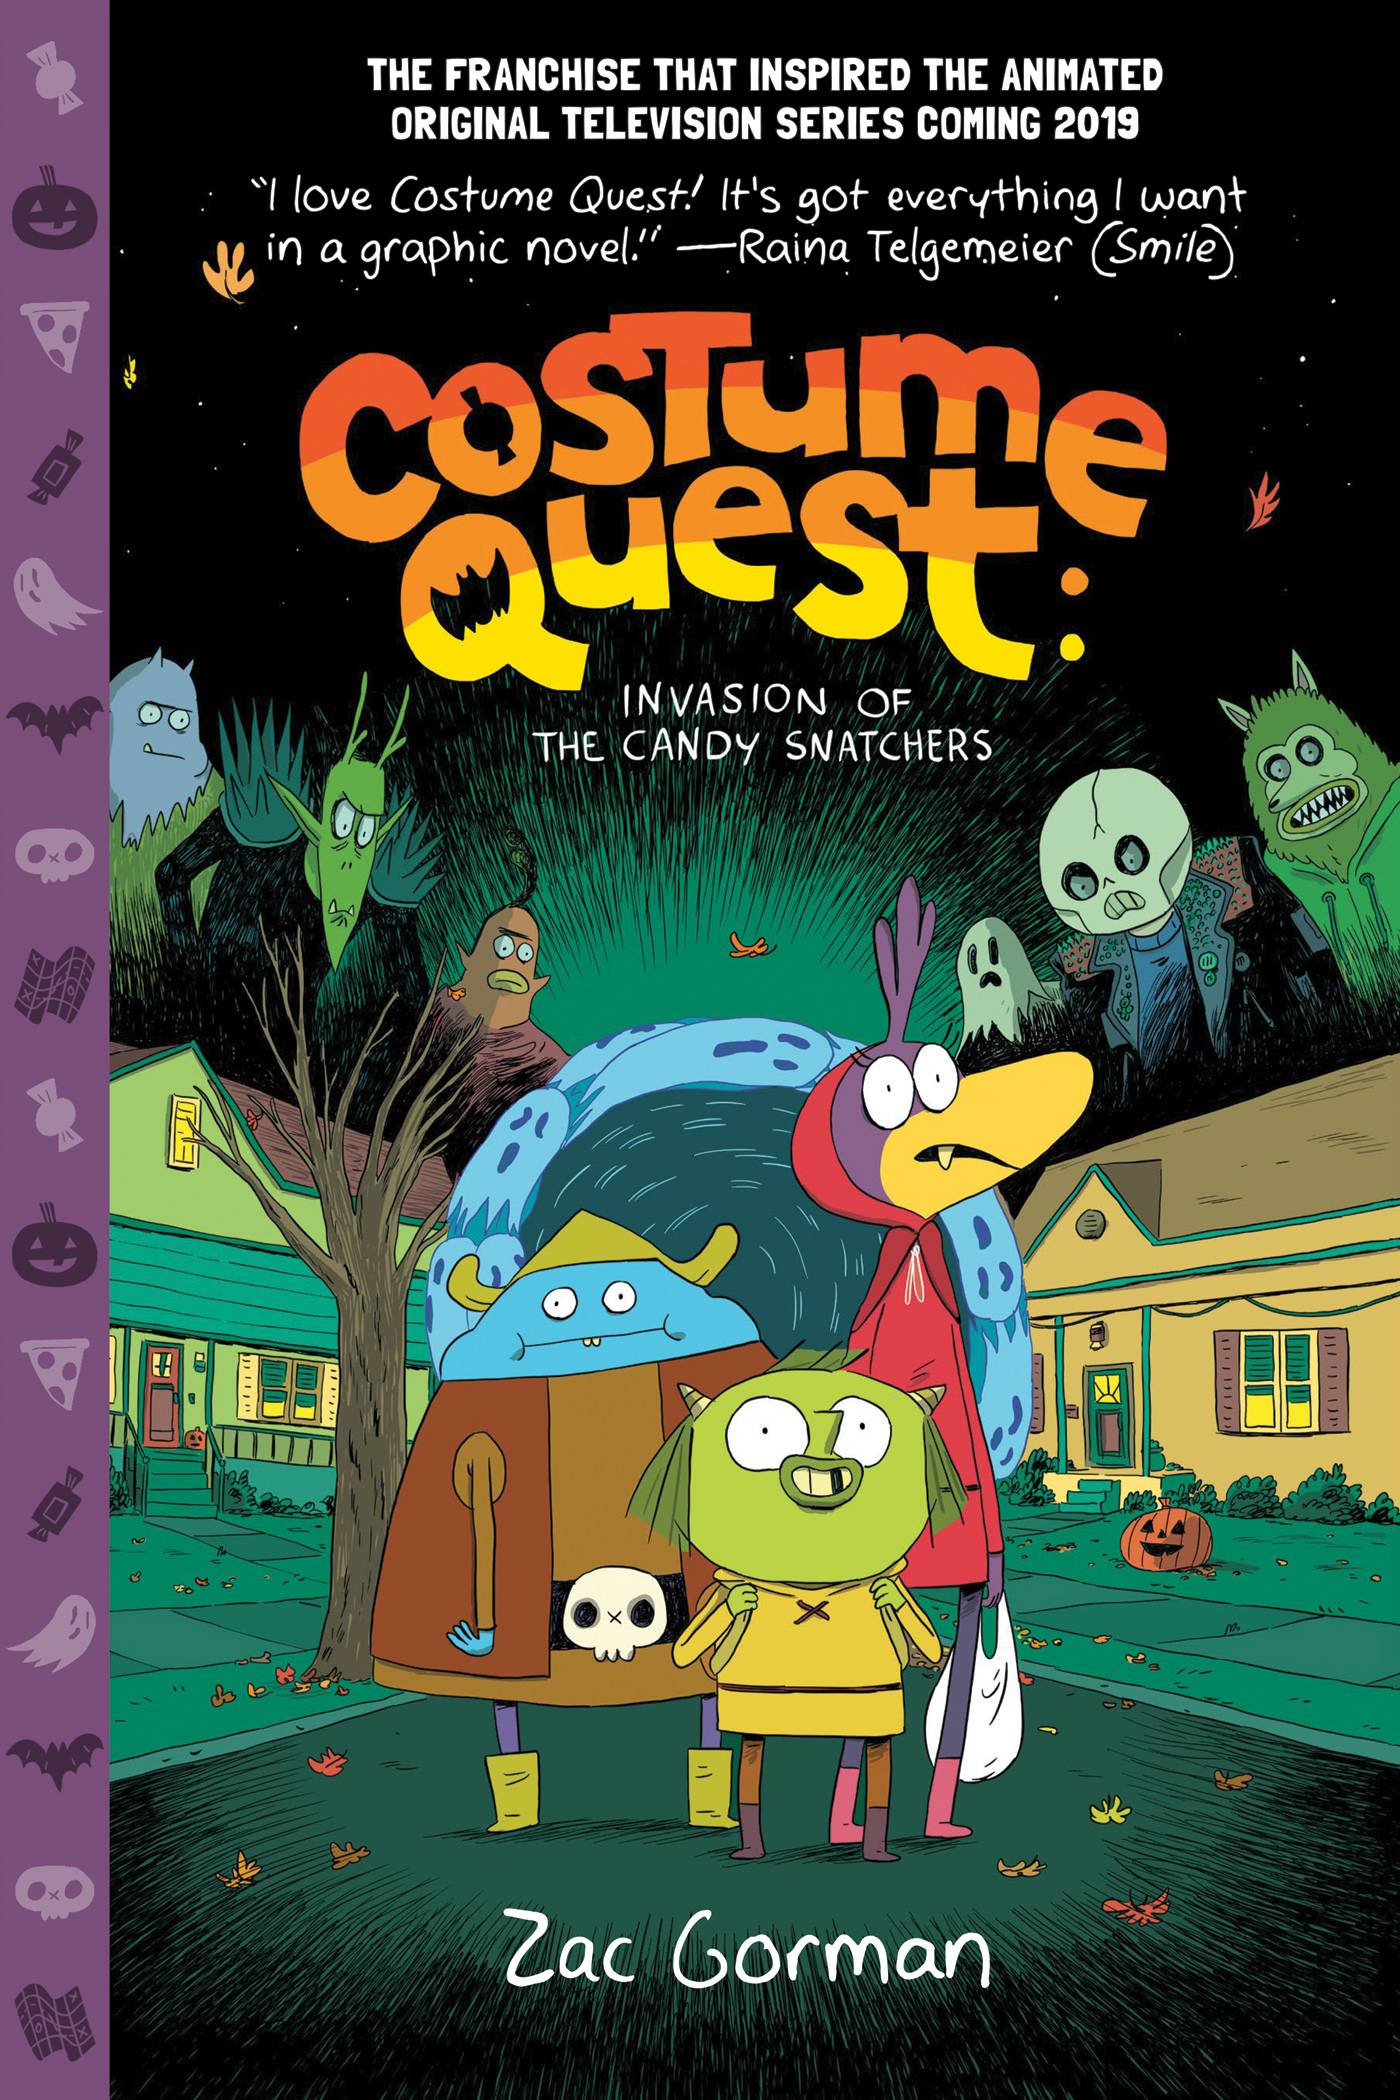 Costume Quest Graphic Novel Invasion of Candy Snatchers